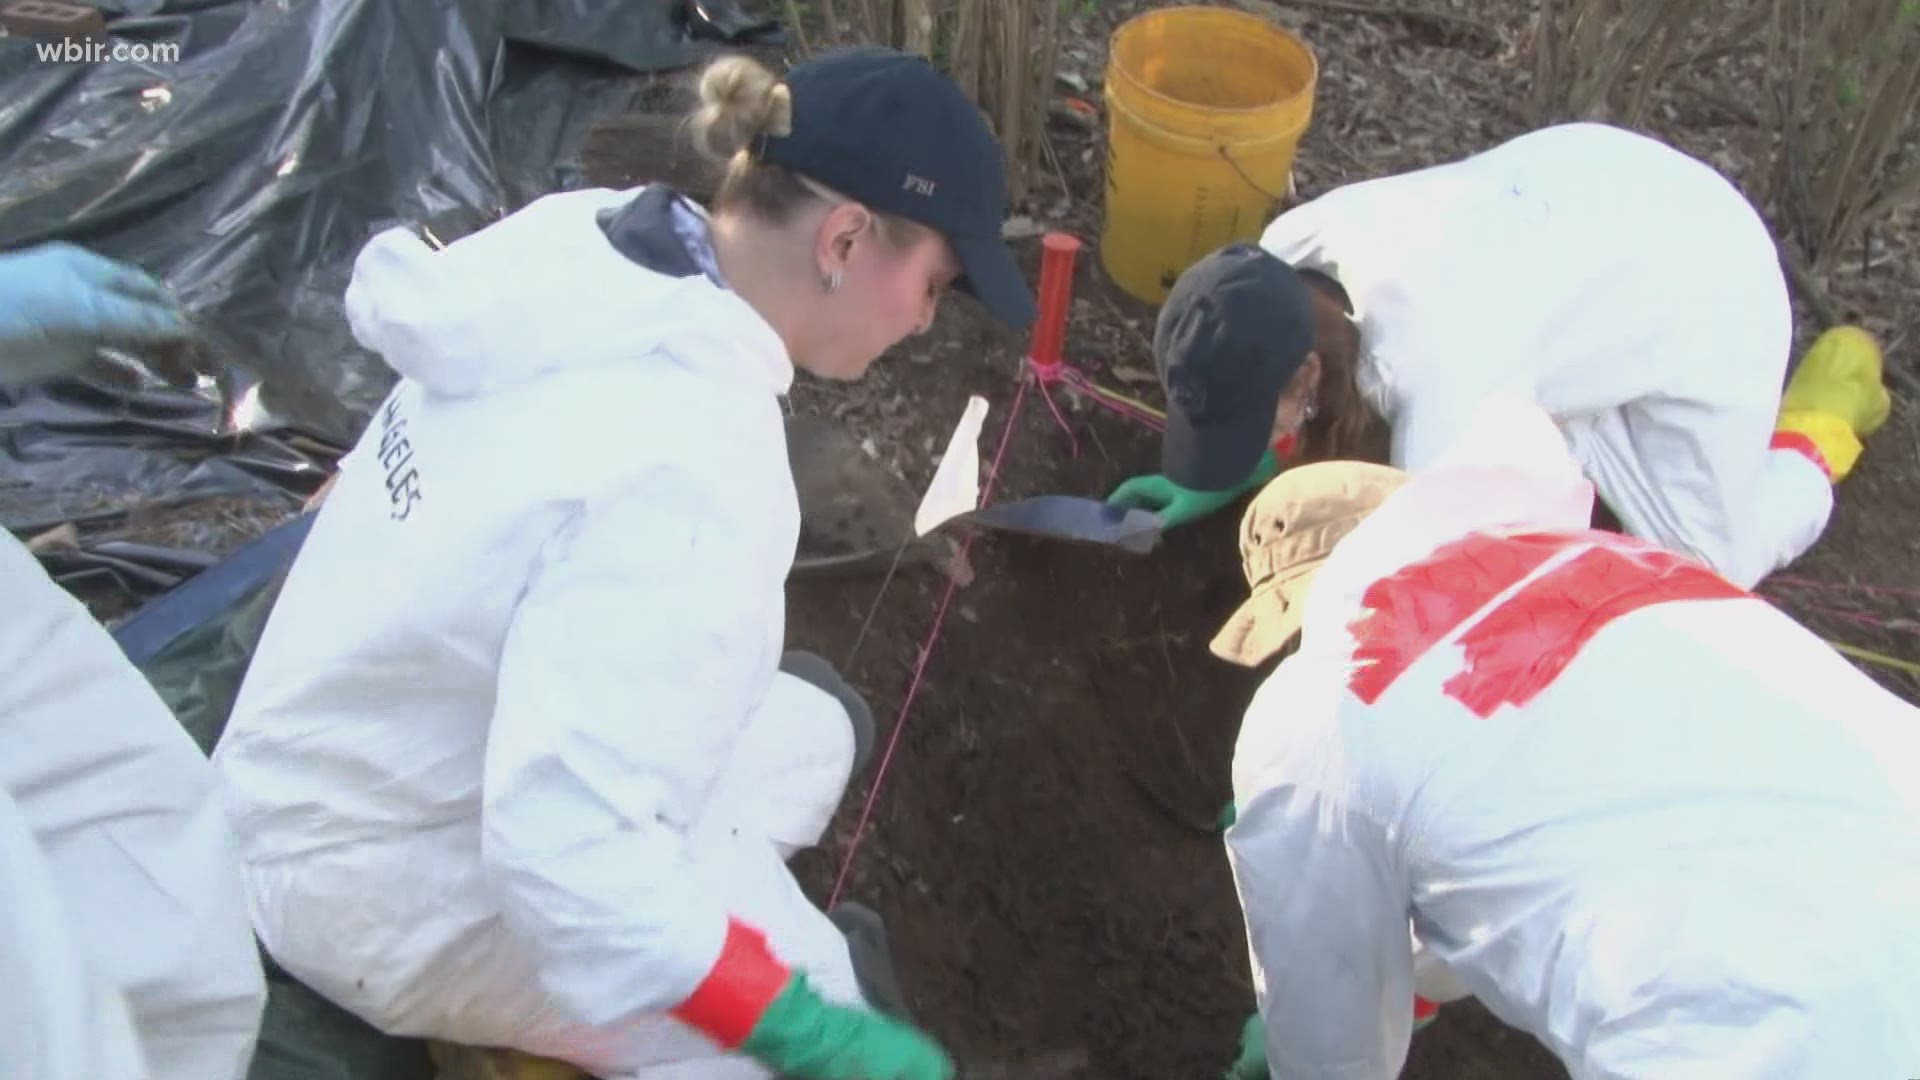 Experts at UT's Body Farm are researching whether tree colors can help locate the bodies of missing people.